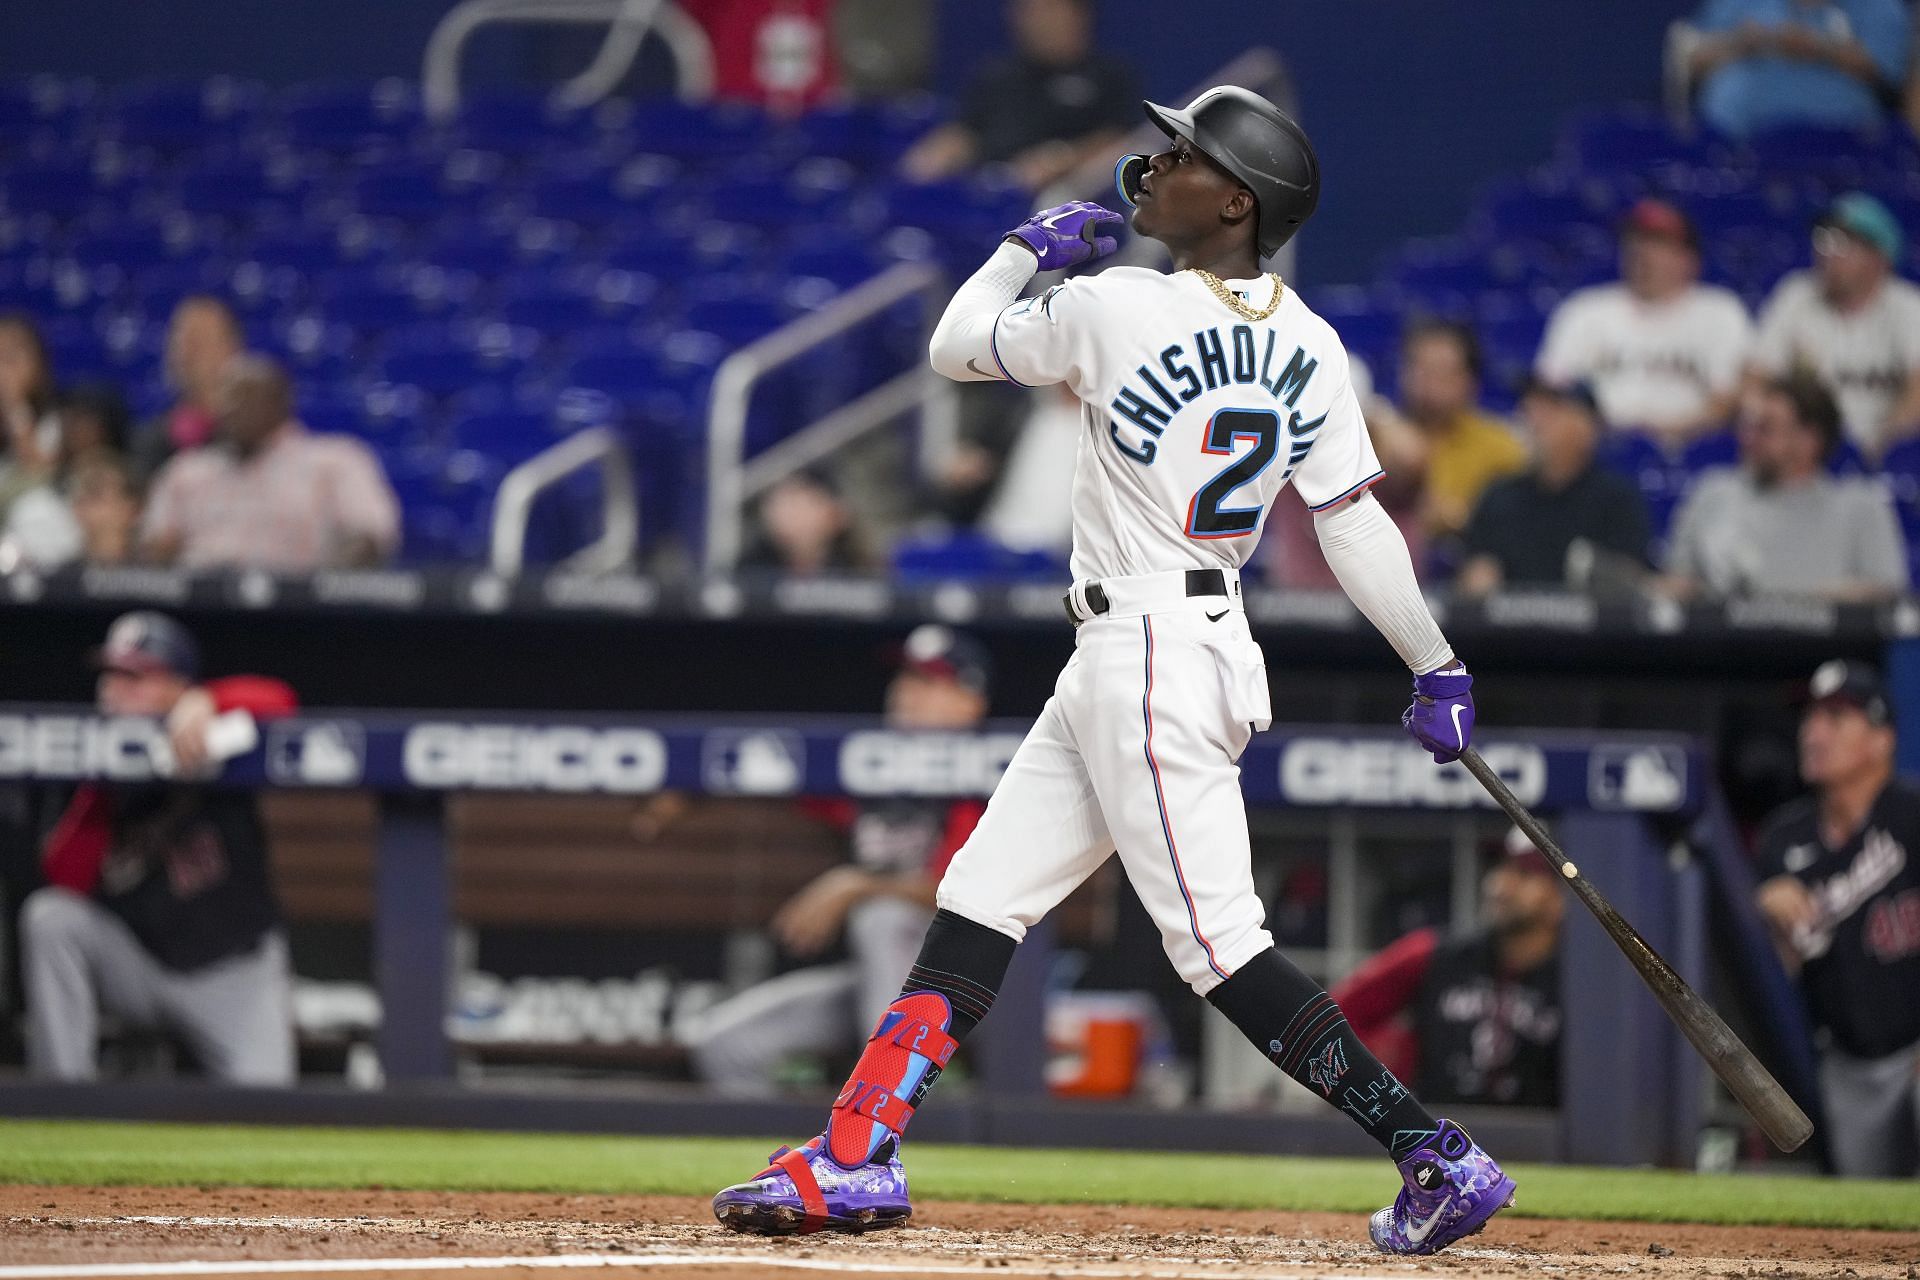 Jazz Chisholm at bat for the Miami Marlins in a game against the Washington Nationals.